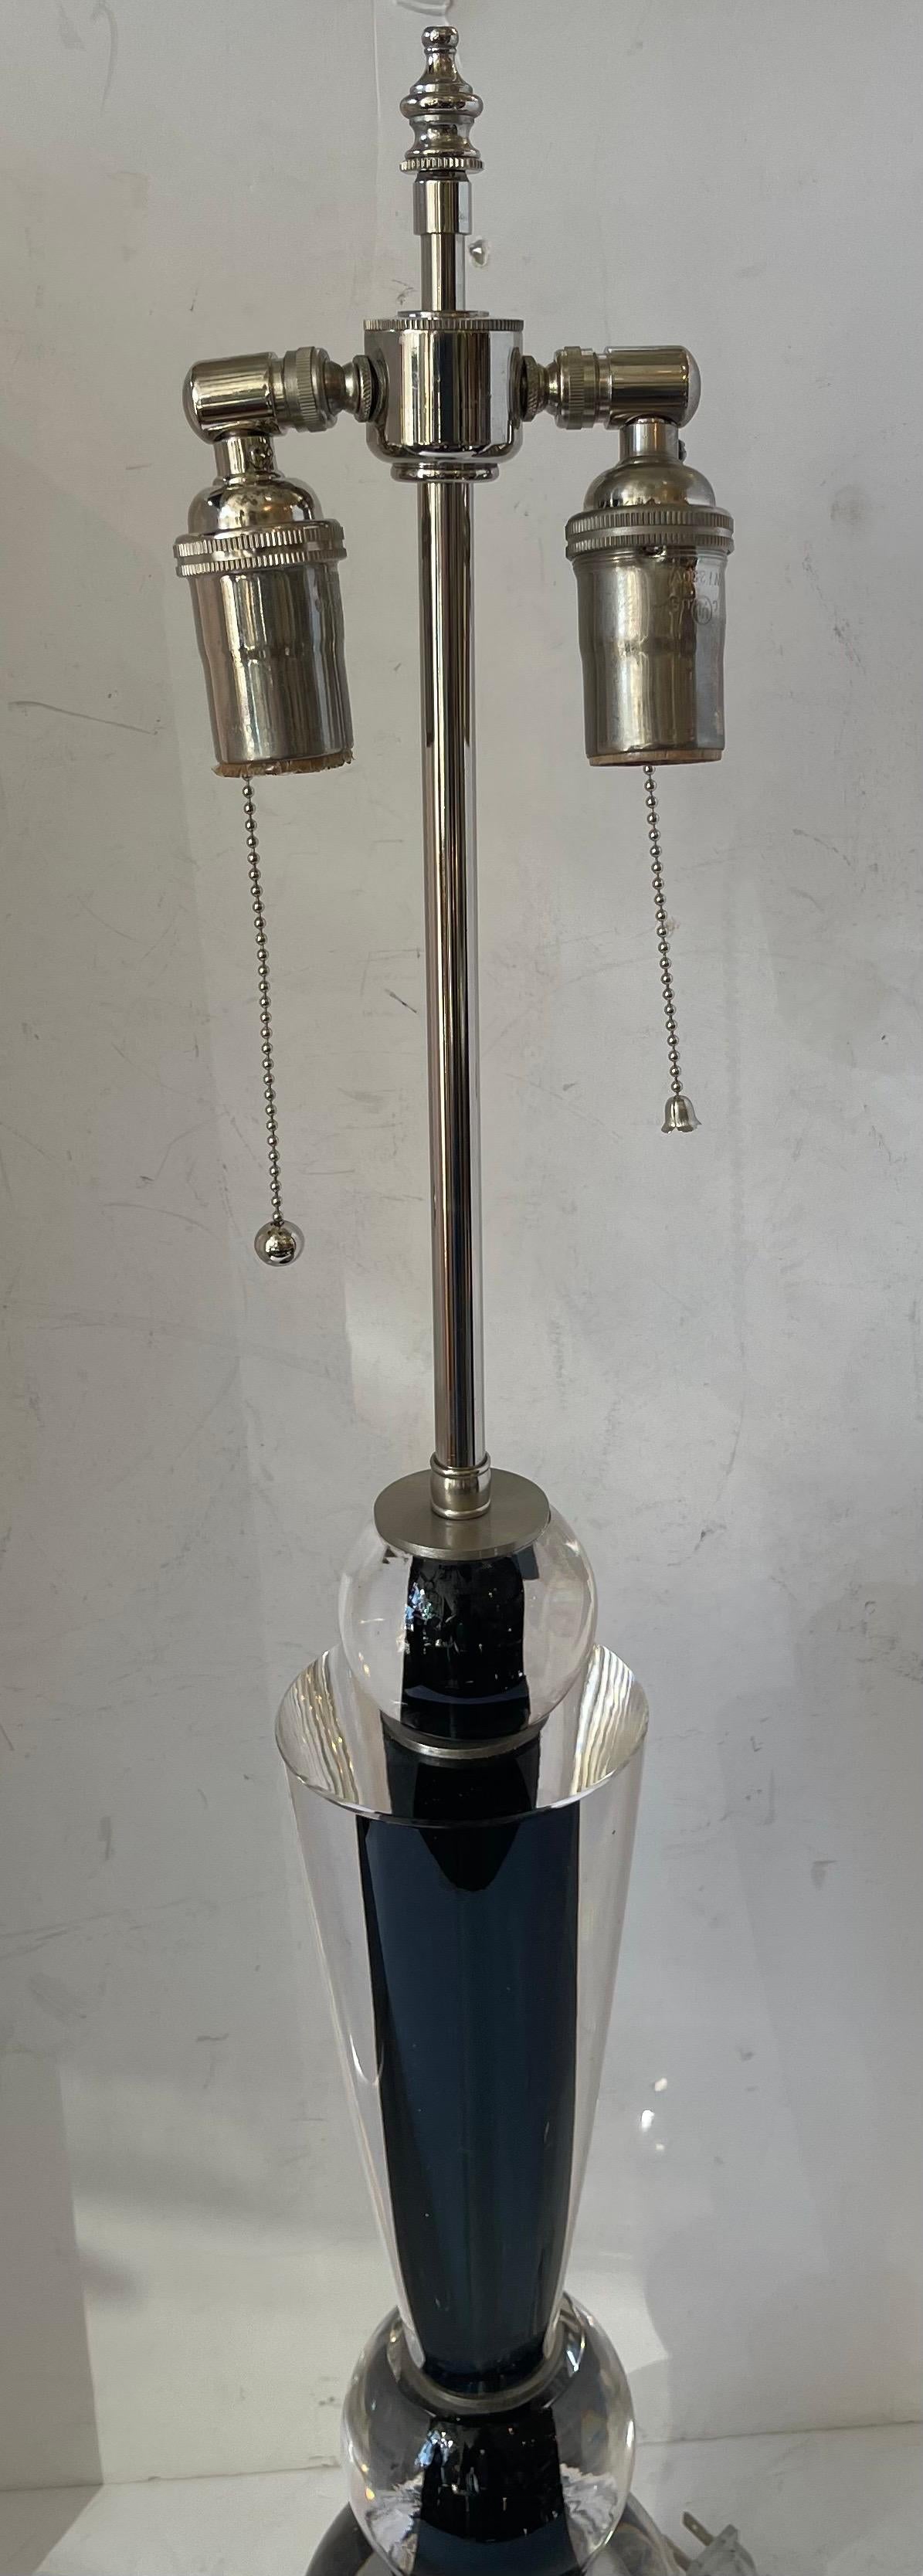 A Wonderful Mid Century Modern Murano / Venetian Lorin Marsh Black Clear Glass Table Lamp Rewired With Two Edison Nickel Sockets.
Original Showroom Sticker Still Attached With Inventory Number 4859210
The Original Sticker Price For This Lamp Was